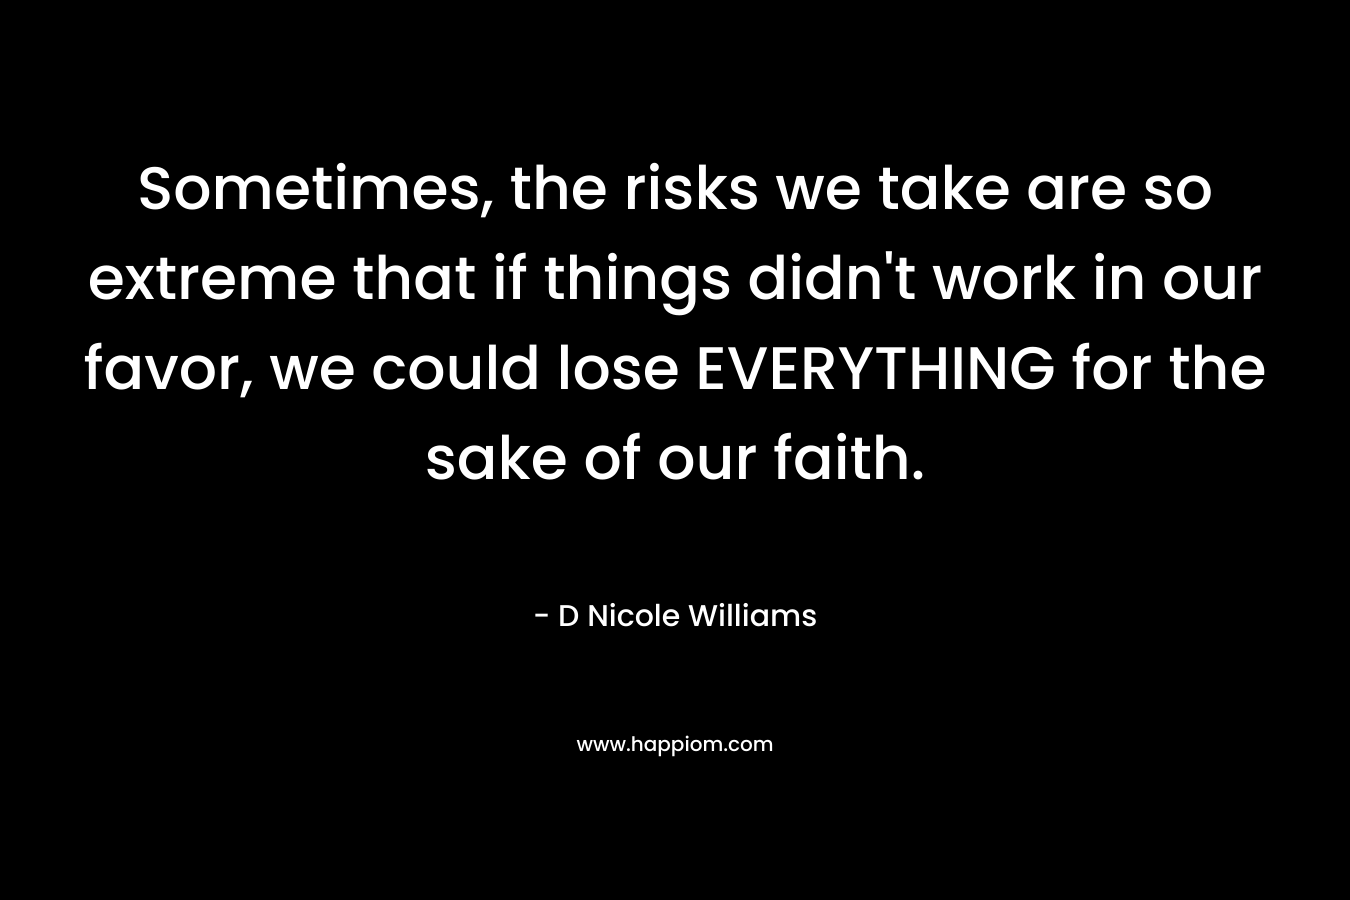 Sometimes, the risks we take are so extreme that if things didn't work in our favor, we could lose EVERYTHING for the sake of our faith.